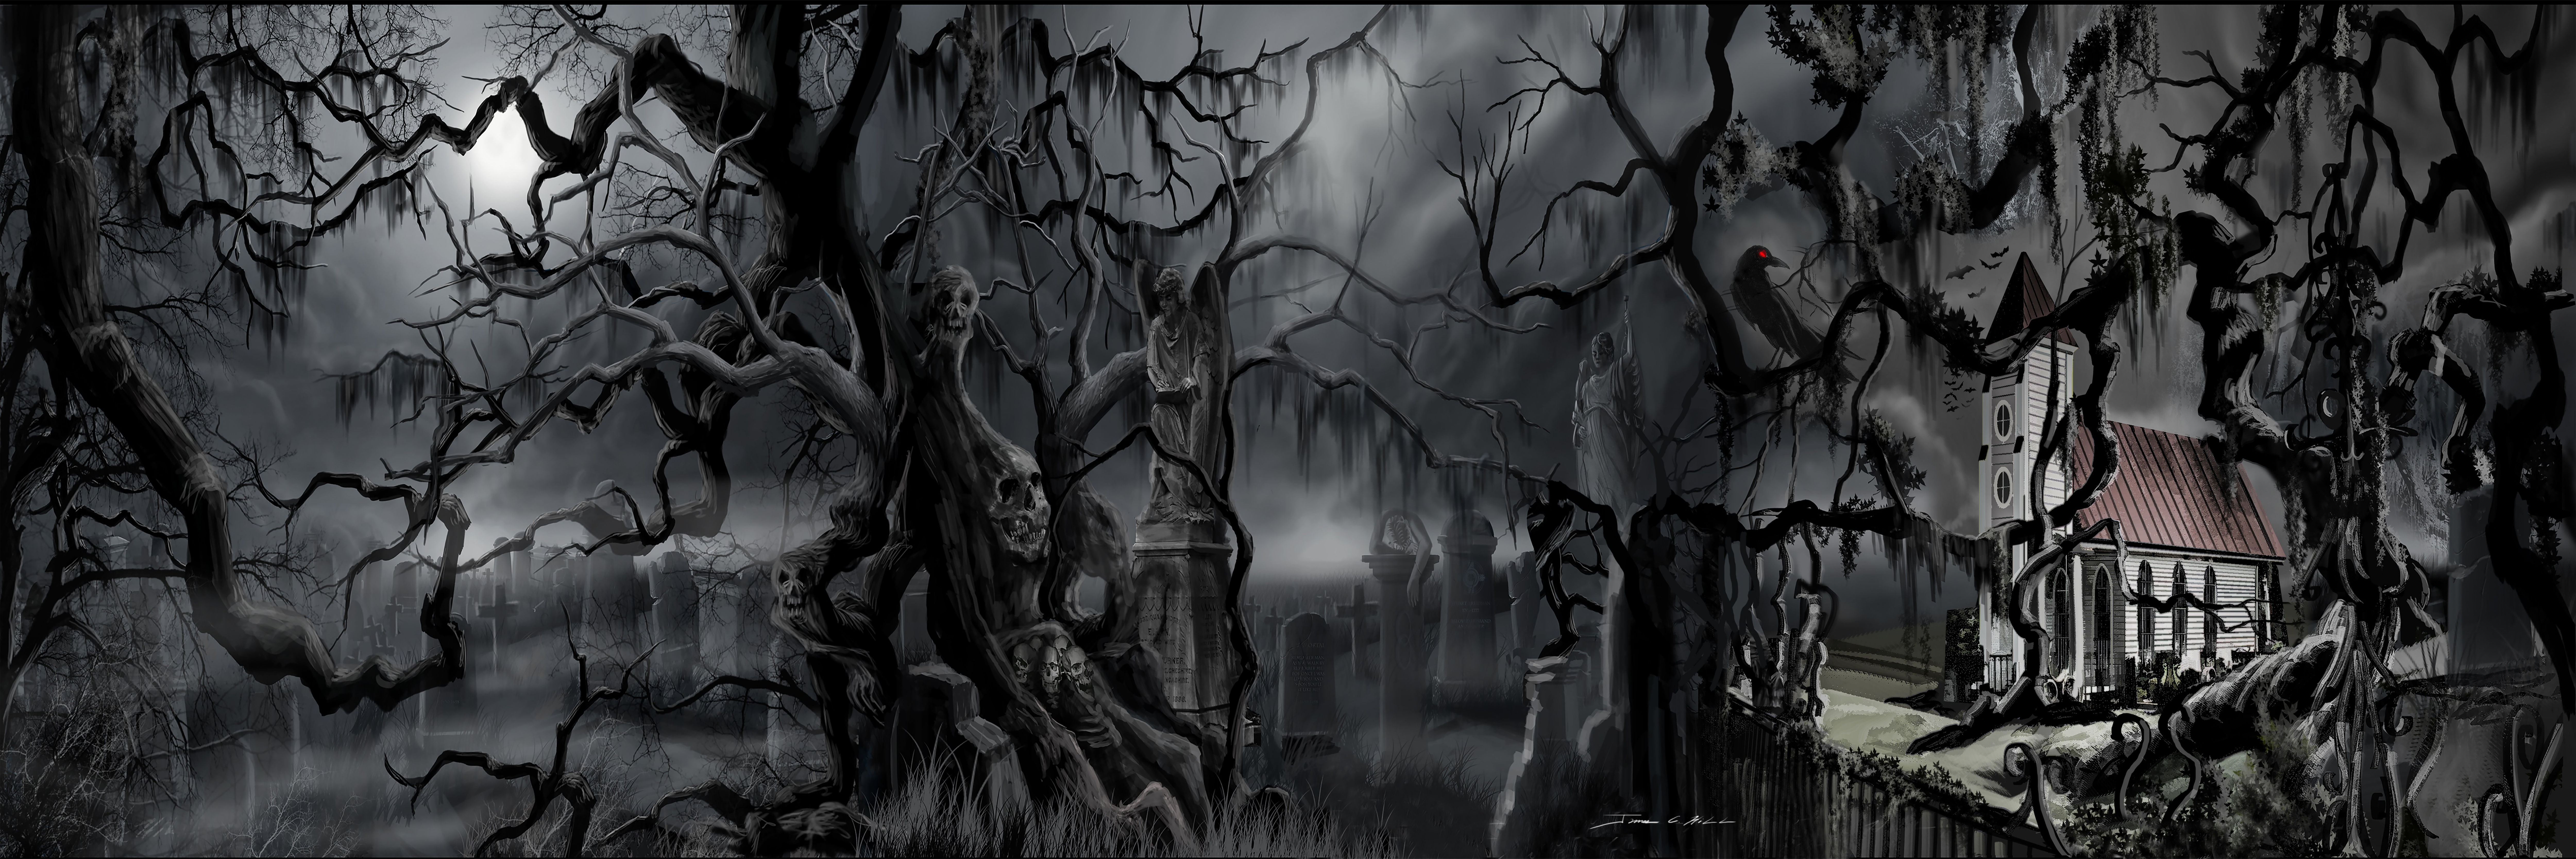 James Hill; Darkness In The Midnight Hour, 2020, Original Digital Painting, 36 x 12 inches. Artwork description: 241 Painting of a mysterious cemetery - Classical Horror Style - Vintage Hollywood - Creepy, Eerie, Haunted, Supernatural...